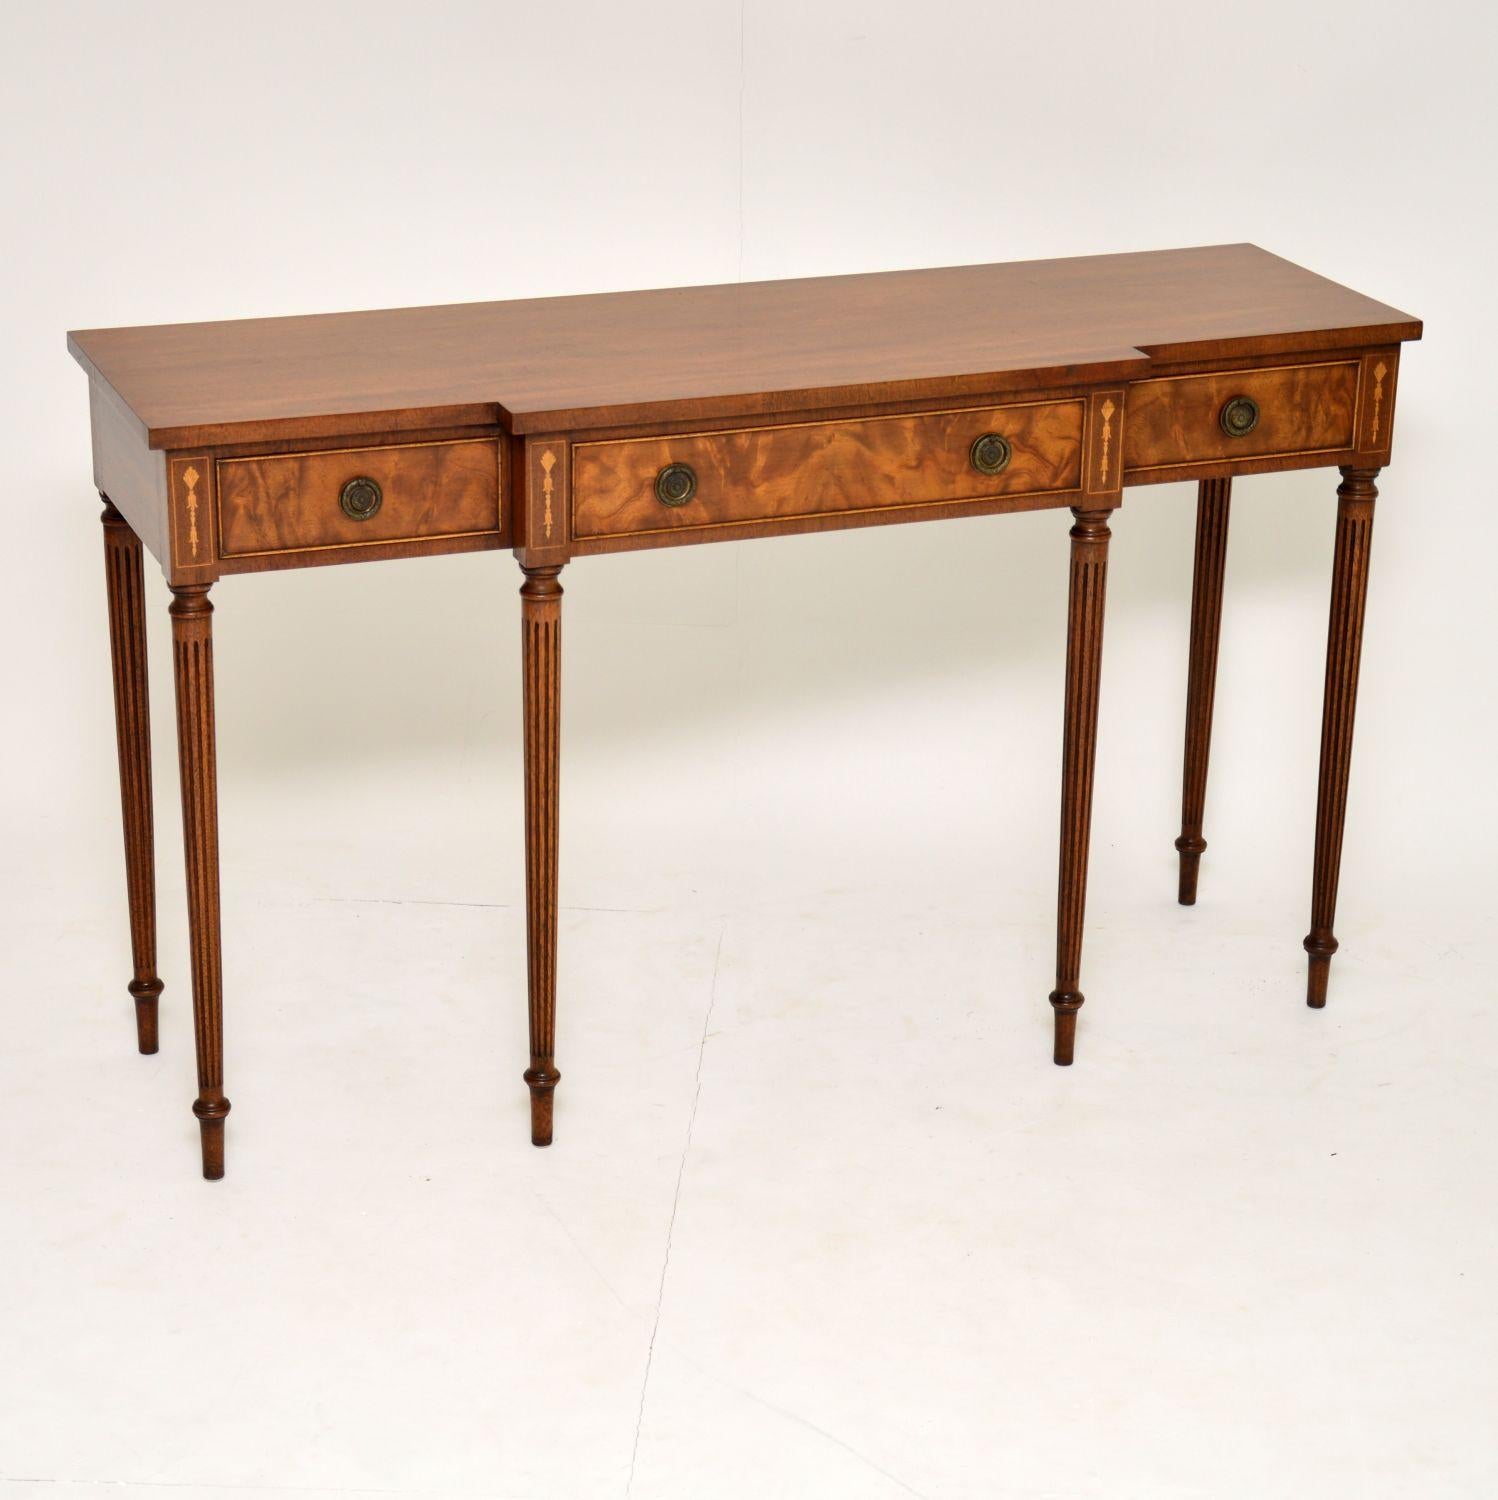 Very elegant antique Sheraton style mahogany breakfront console side table which is both long & slim. It’s Fine quality & in excellent condition. There are three flame mahogany drawers with original brass handles & Fine dovetails. There are also